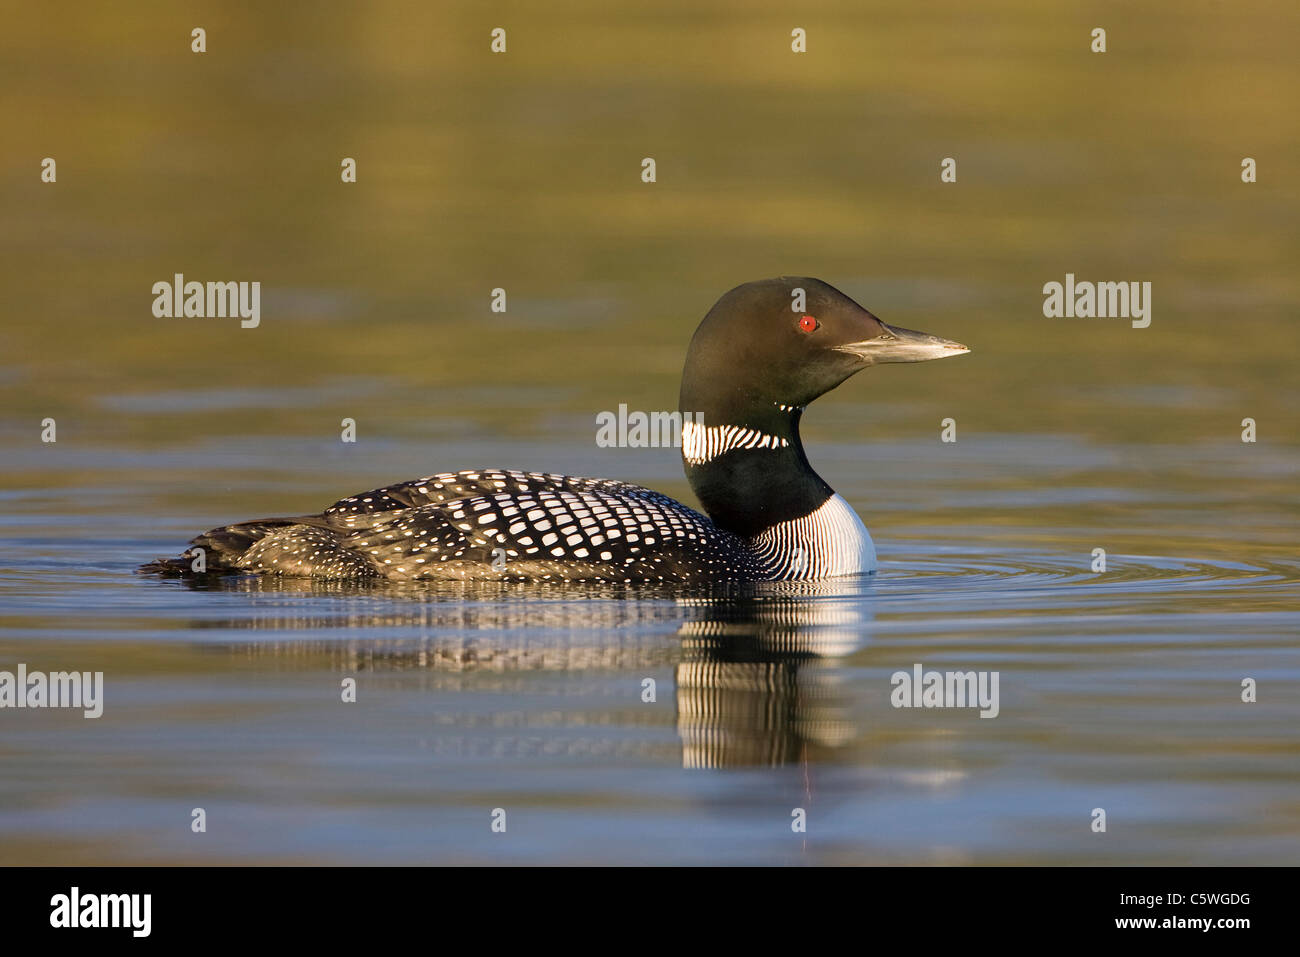 Common Loon, Great Northern Diver (Gavia immer). Adult in summer plumage on lake. Stock Photo